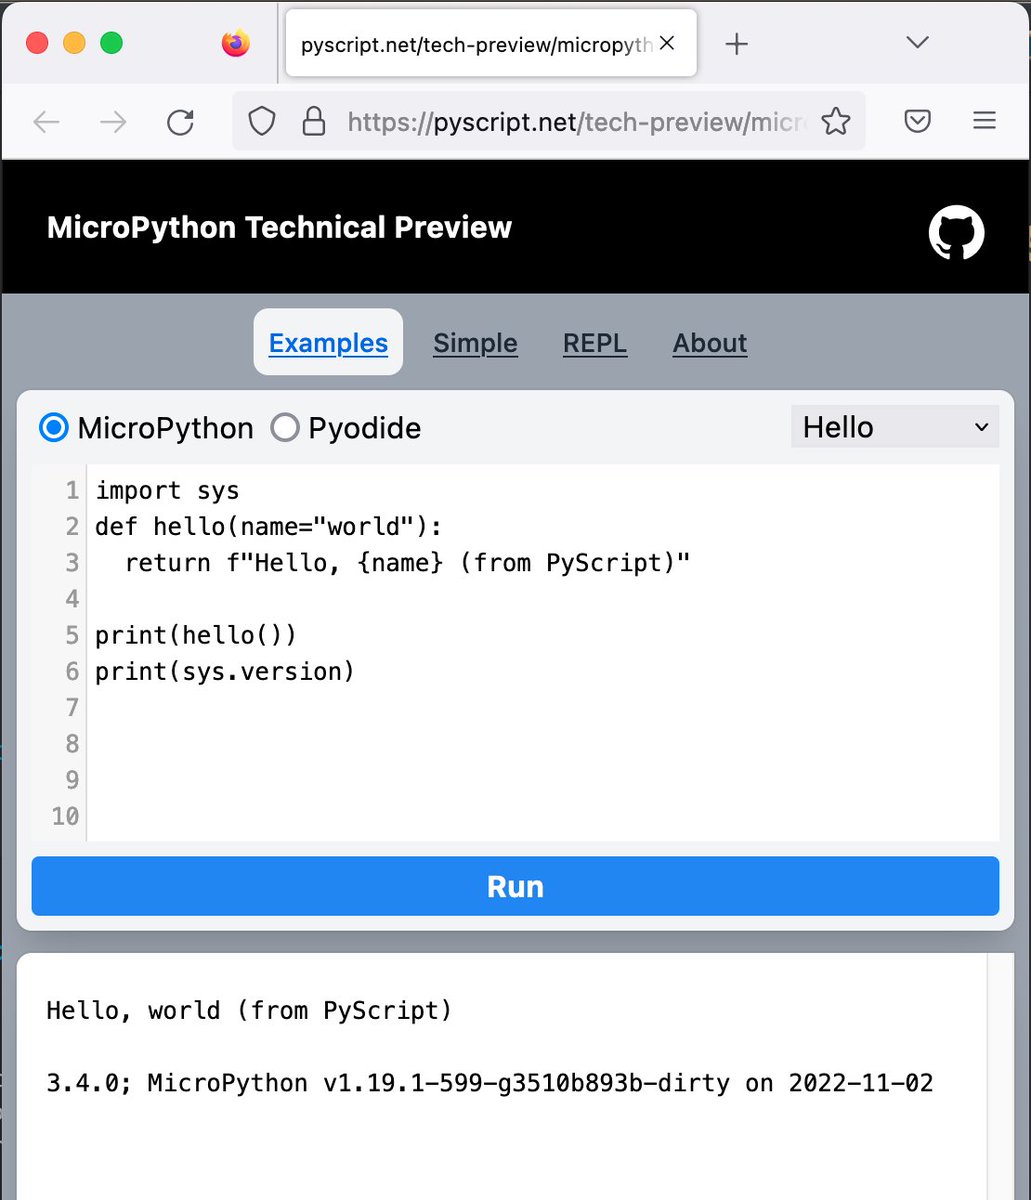 MicroPython Technical Preview

REPL and Examples are ready.

pyscript.net/tech-preview/m…